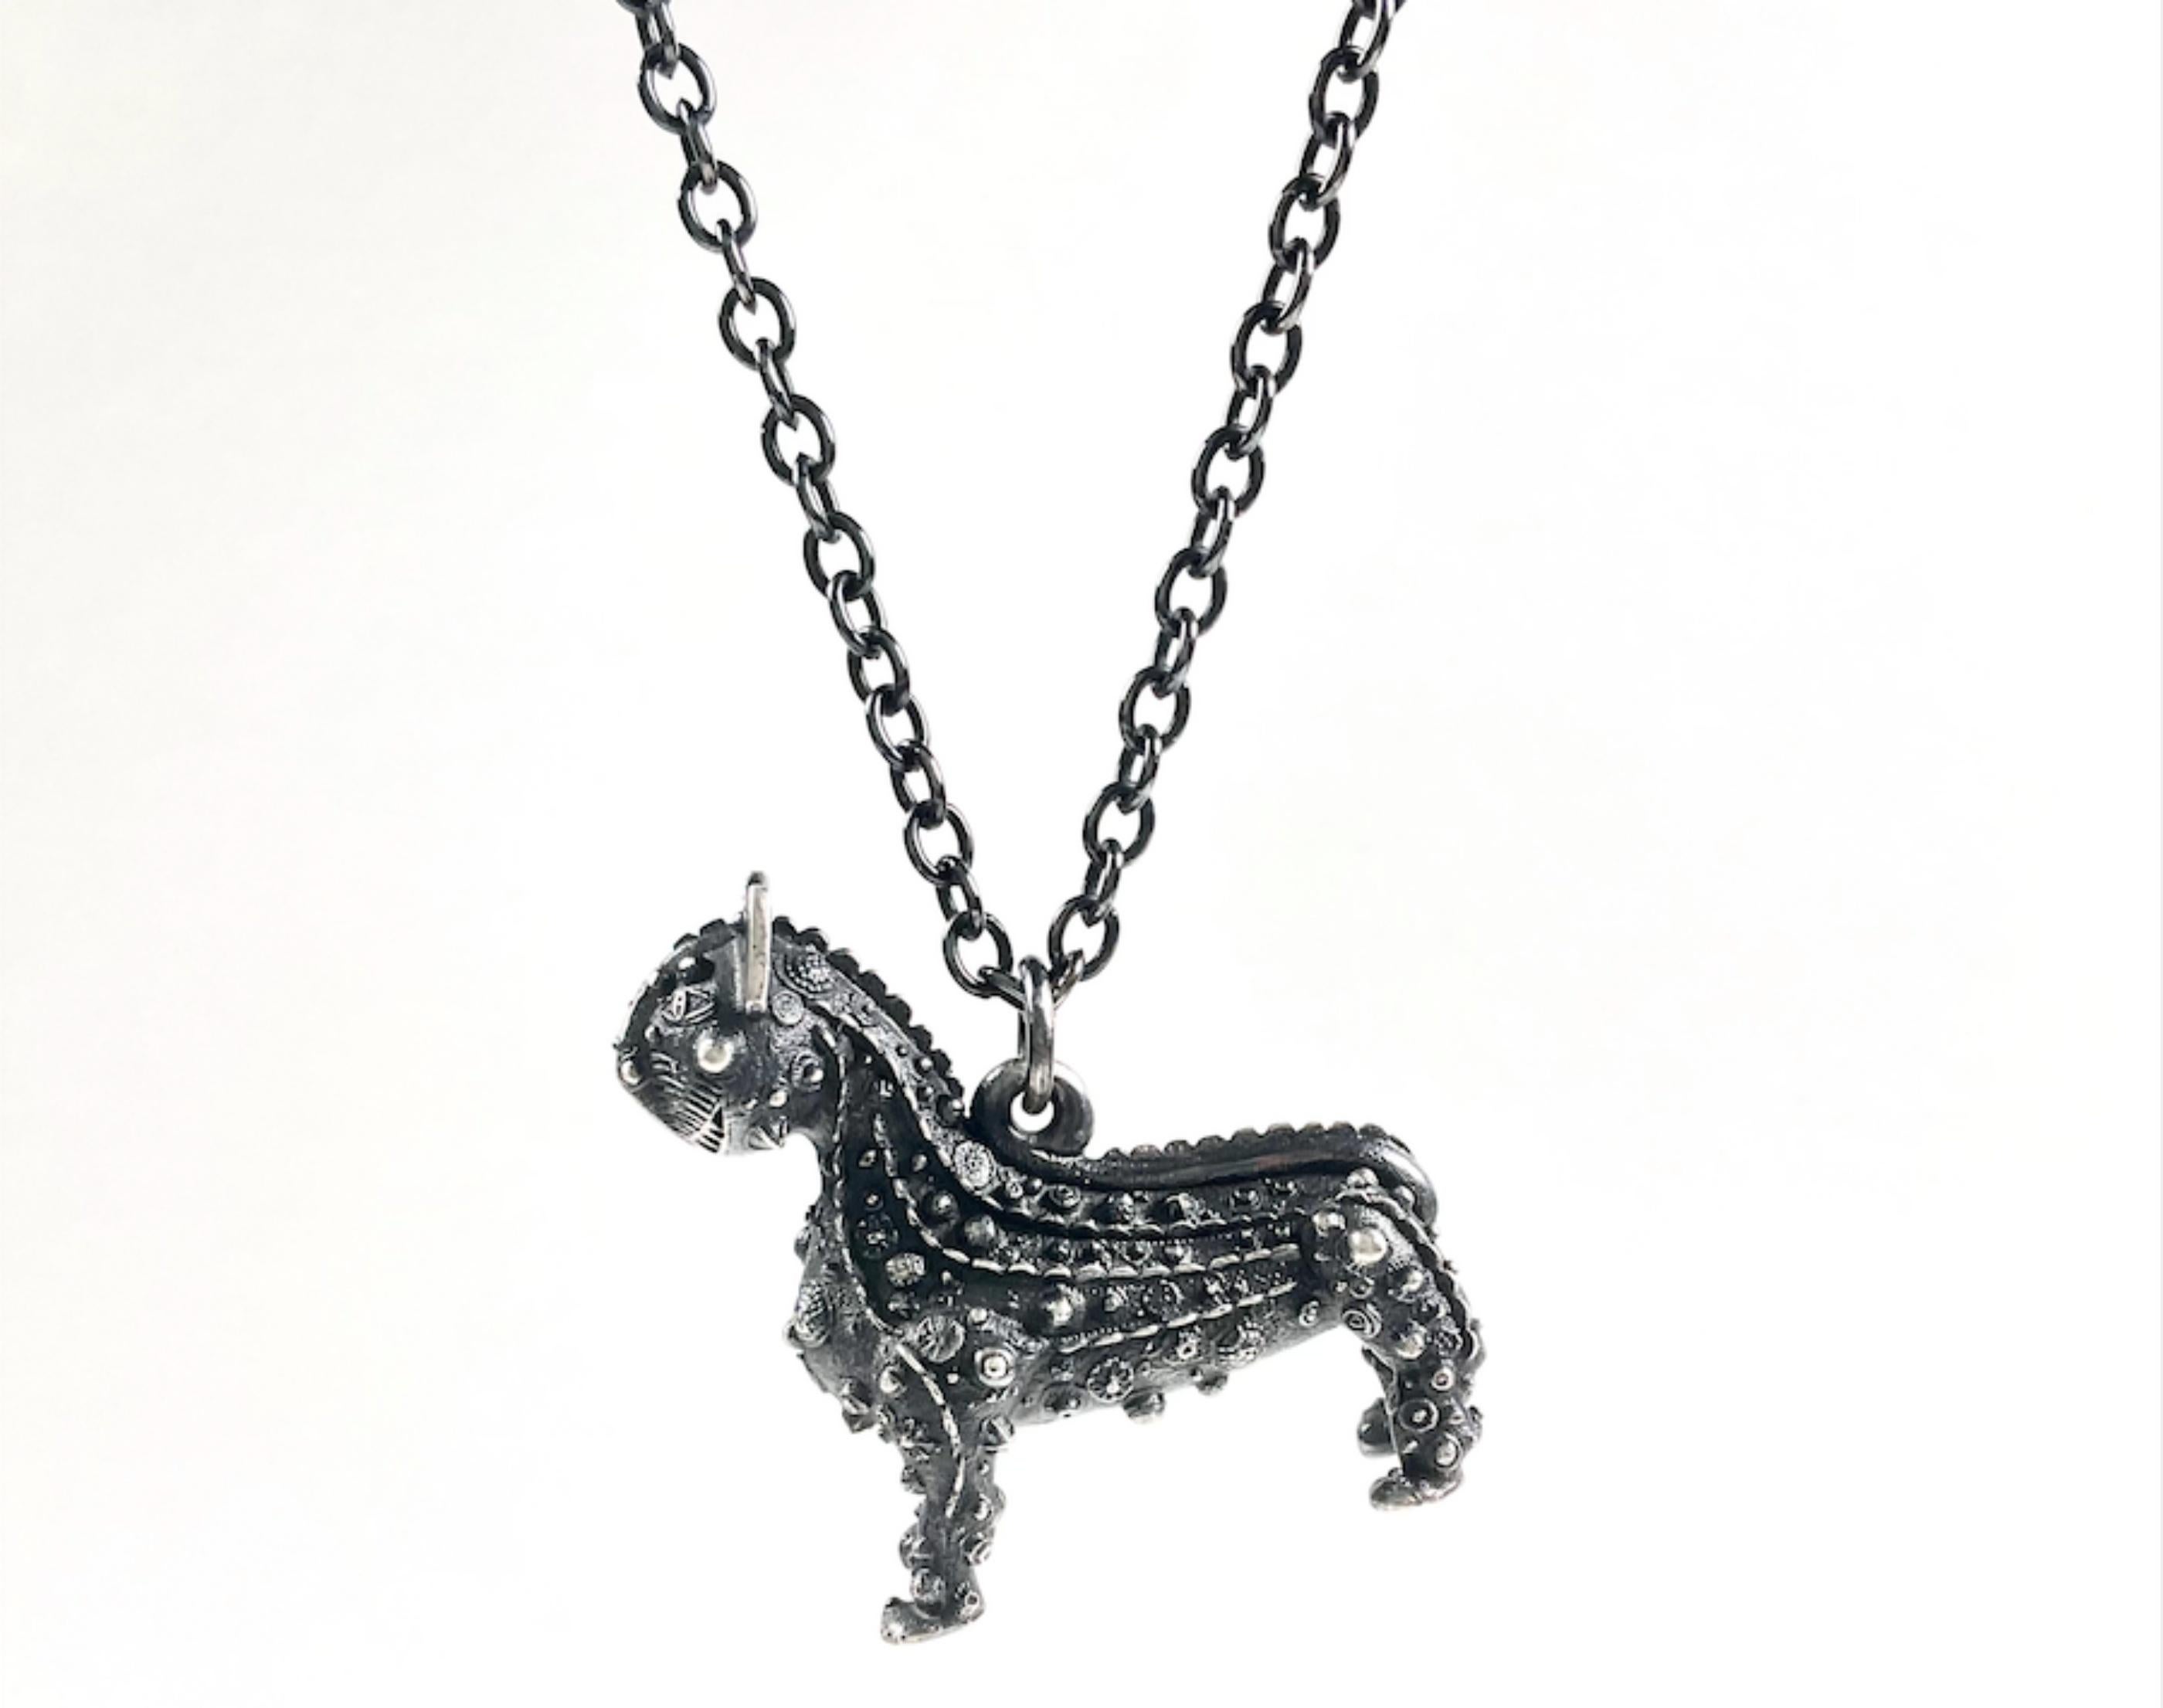 Chris Whitty's Cat Limited Edition silver Pendant (Necklace) - Contemporary Art by Grayson Perry